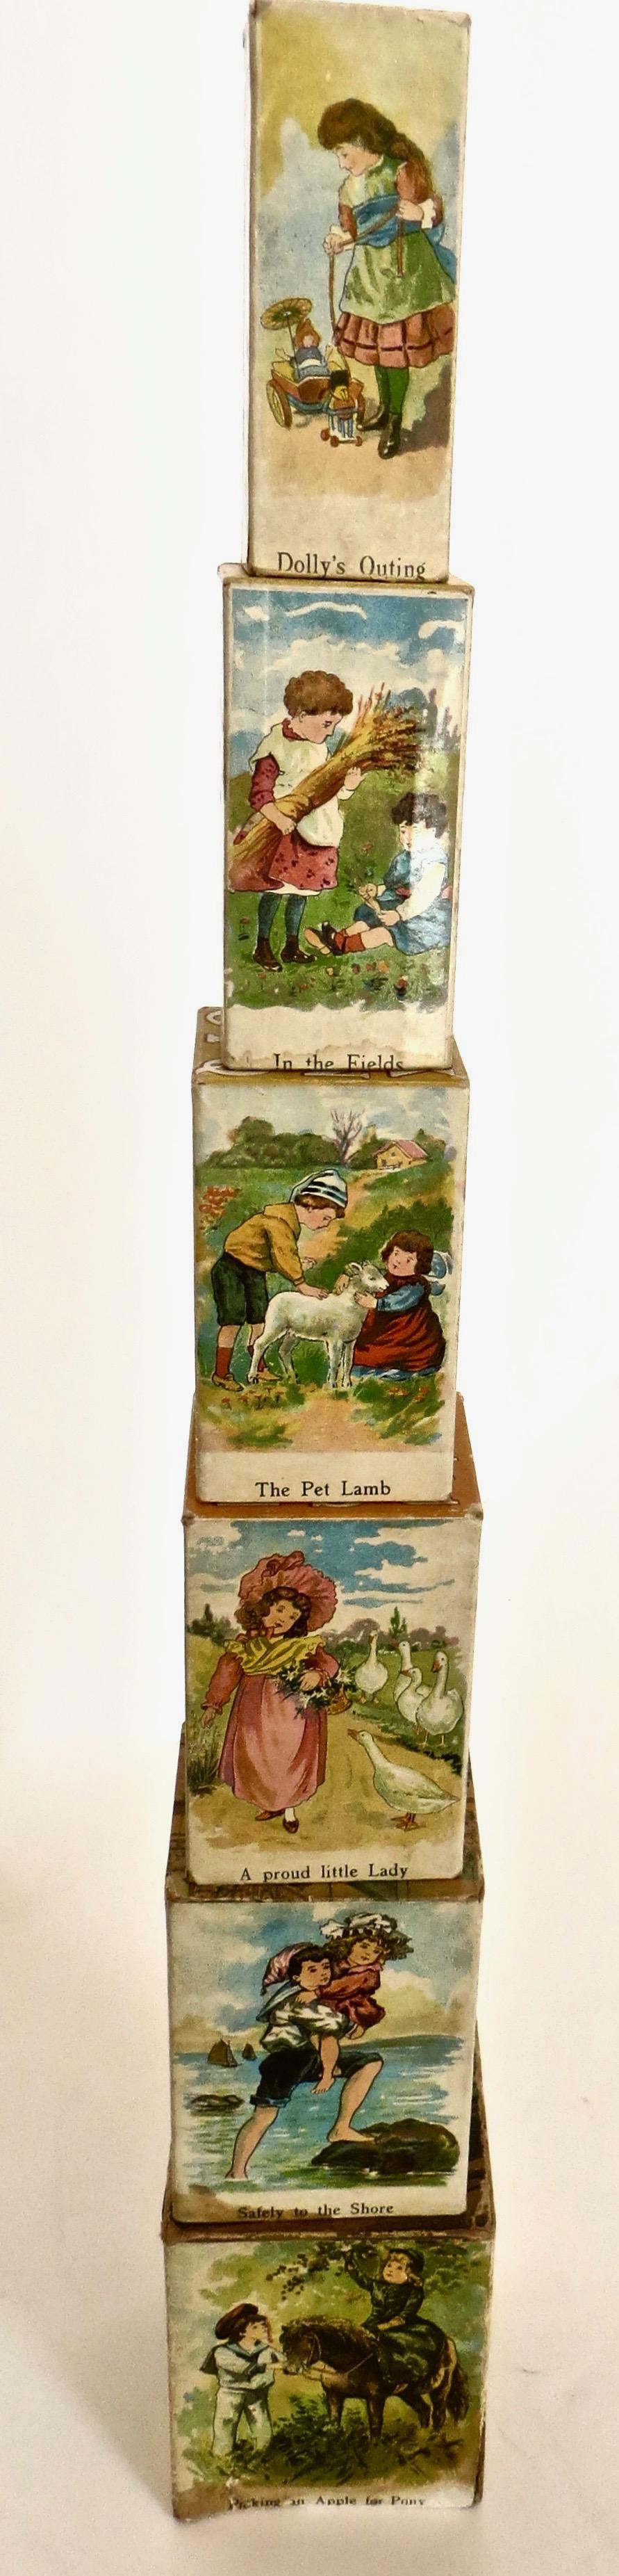 This is a larger set of colorful early 1900's lithographed blocks (seven blocks versus 5 blocks). Considered an early learning device, these turn of the century alphabet blocks were made of chromolithographed paper on hard pressed cardboard, with